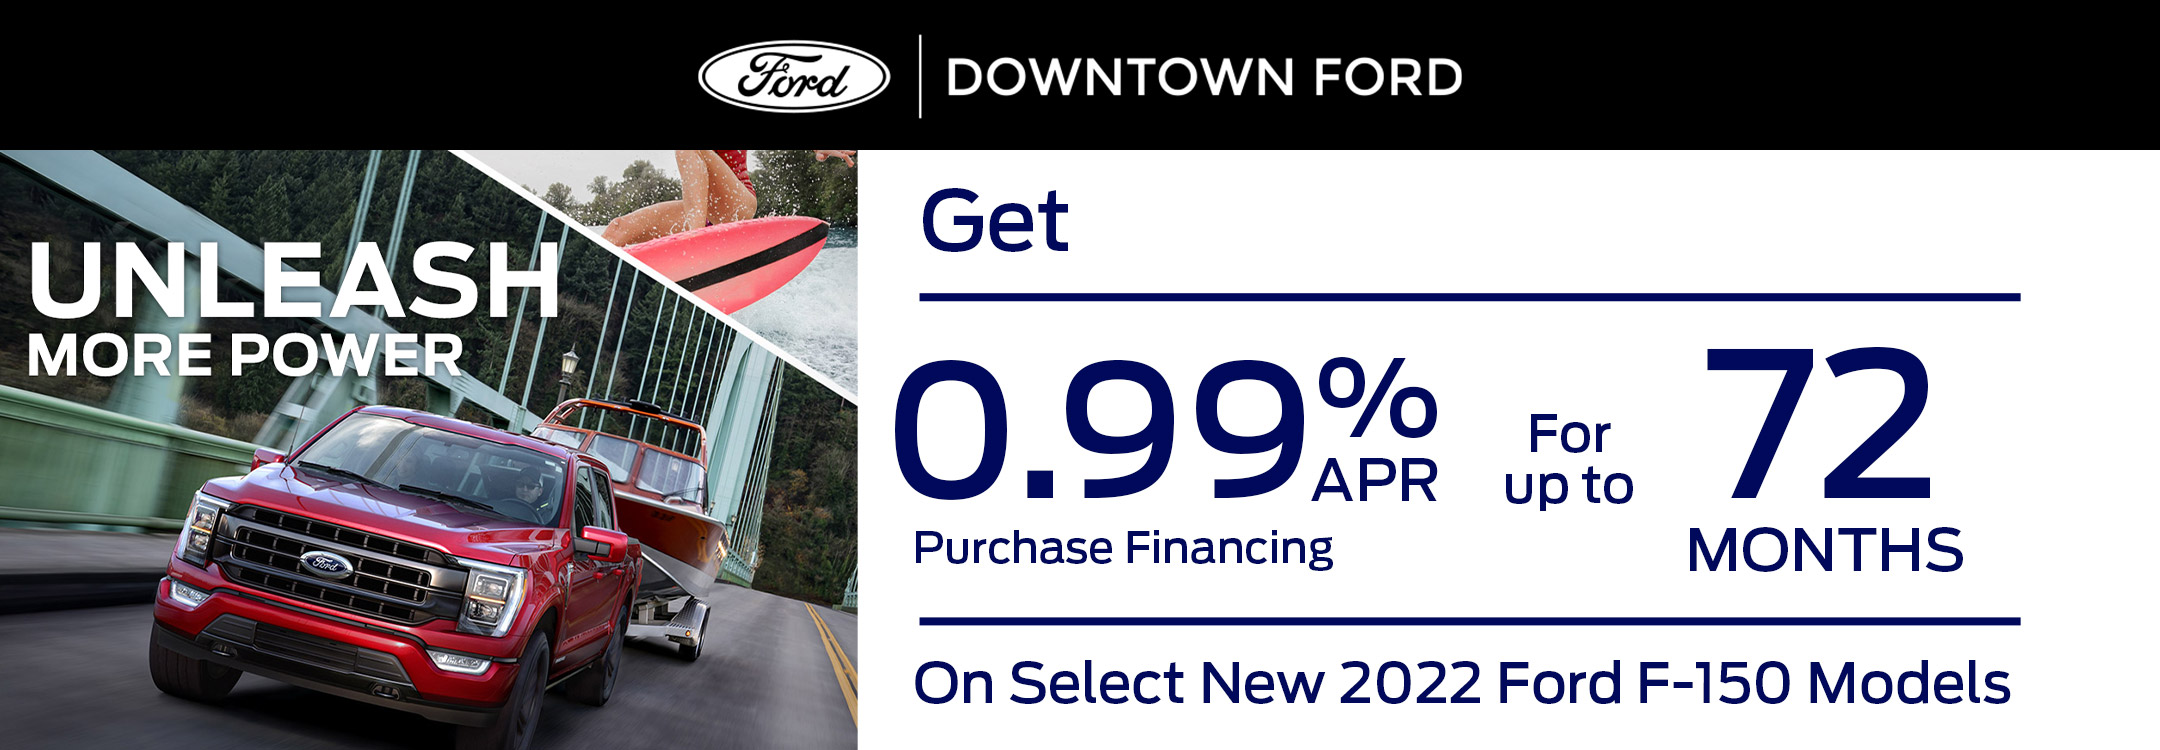 Downtown Ford Specials in Toronto, ON